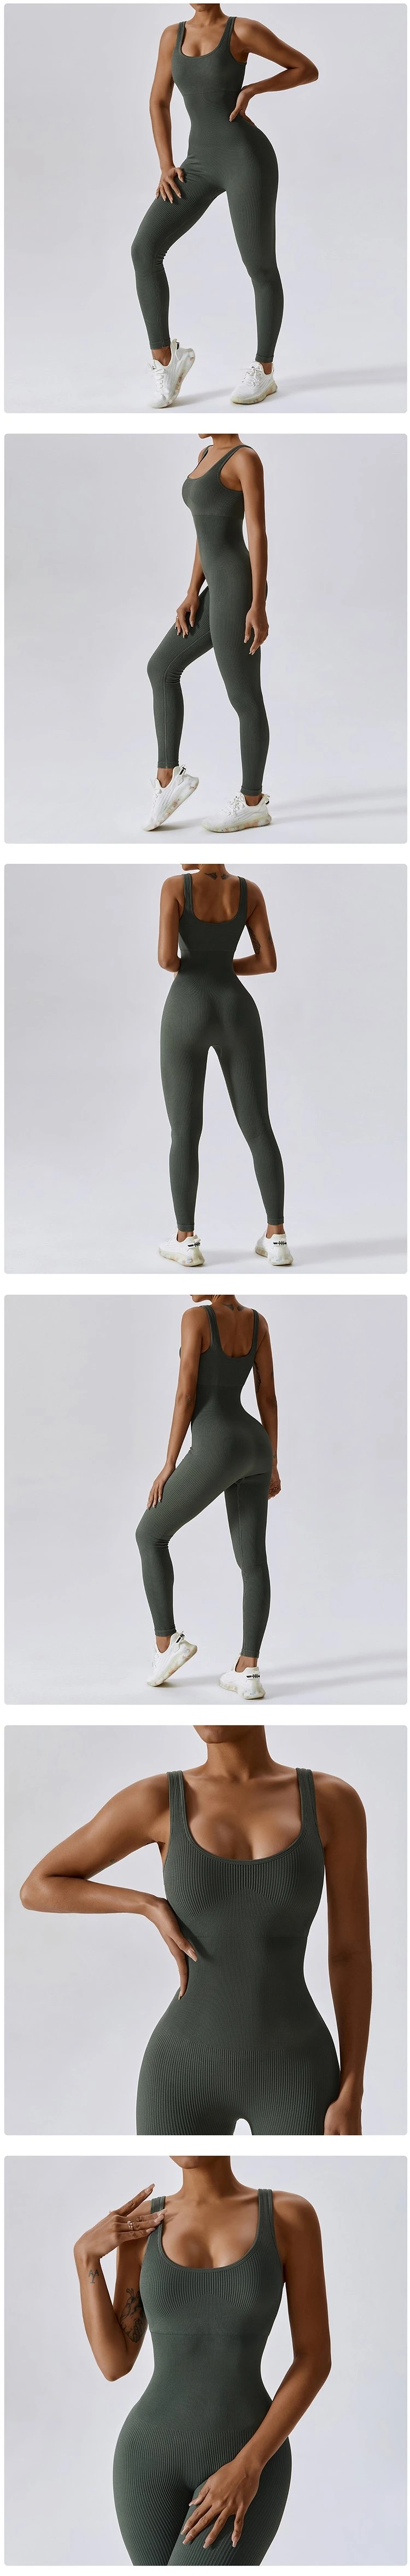 Clt6848 Spring European-American Seamless One-Piece Yoga Suit Dance Tight Fit Exercise Stretch Bodysuit